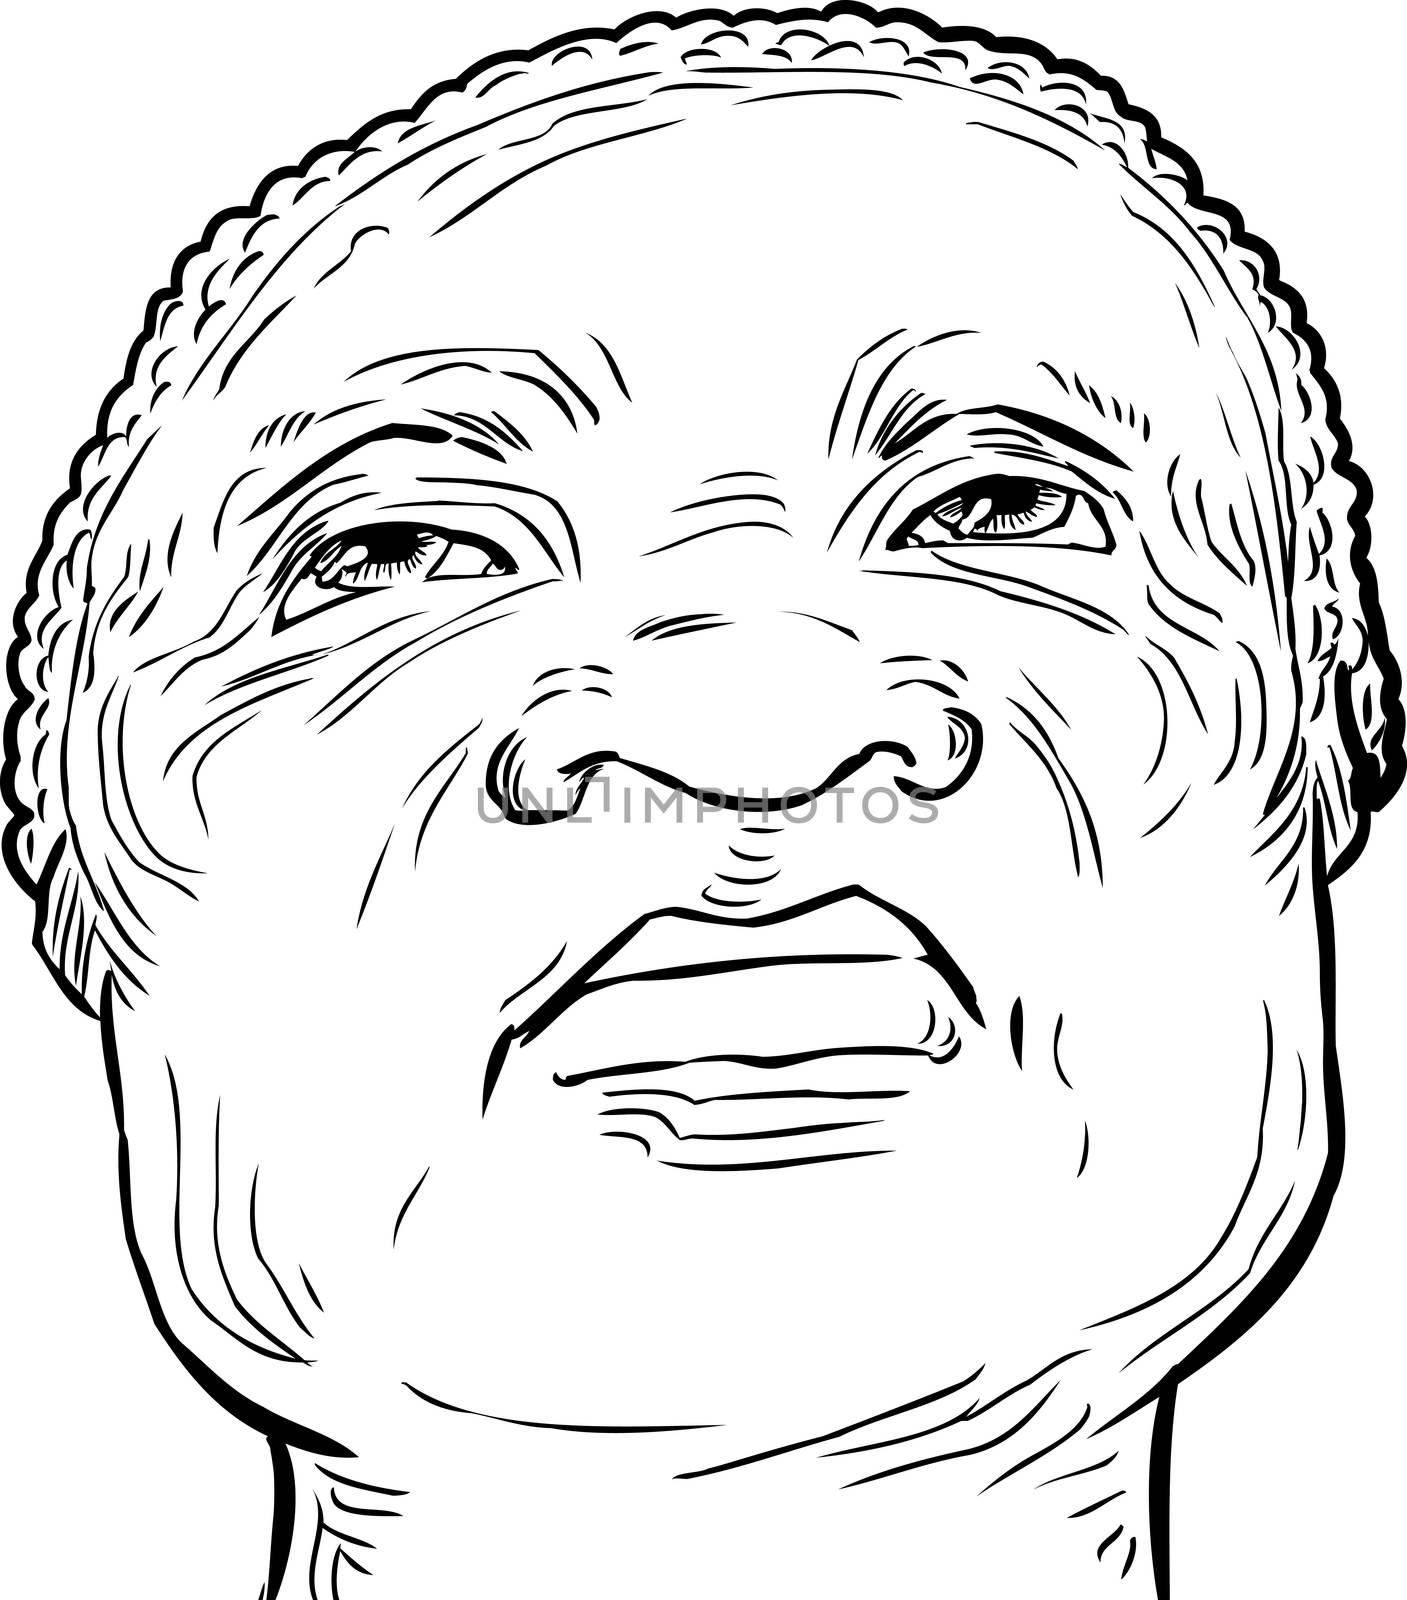 Low angle outline illustration on front of senior man looking upward